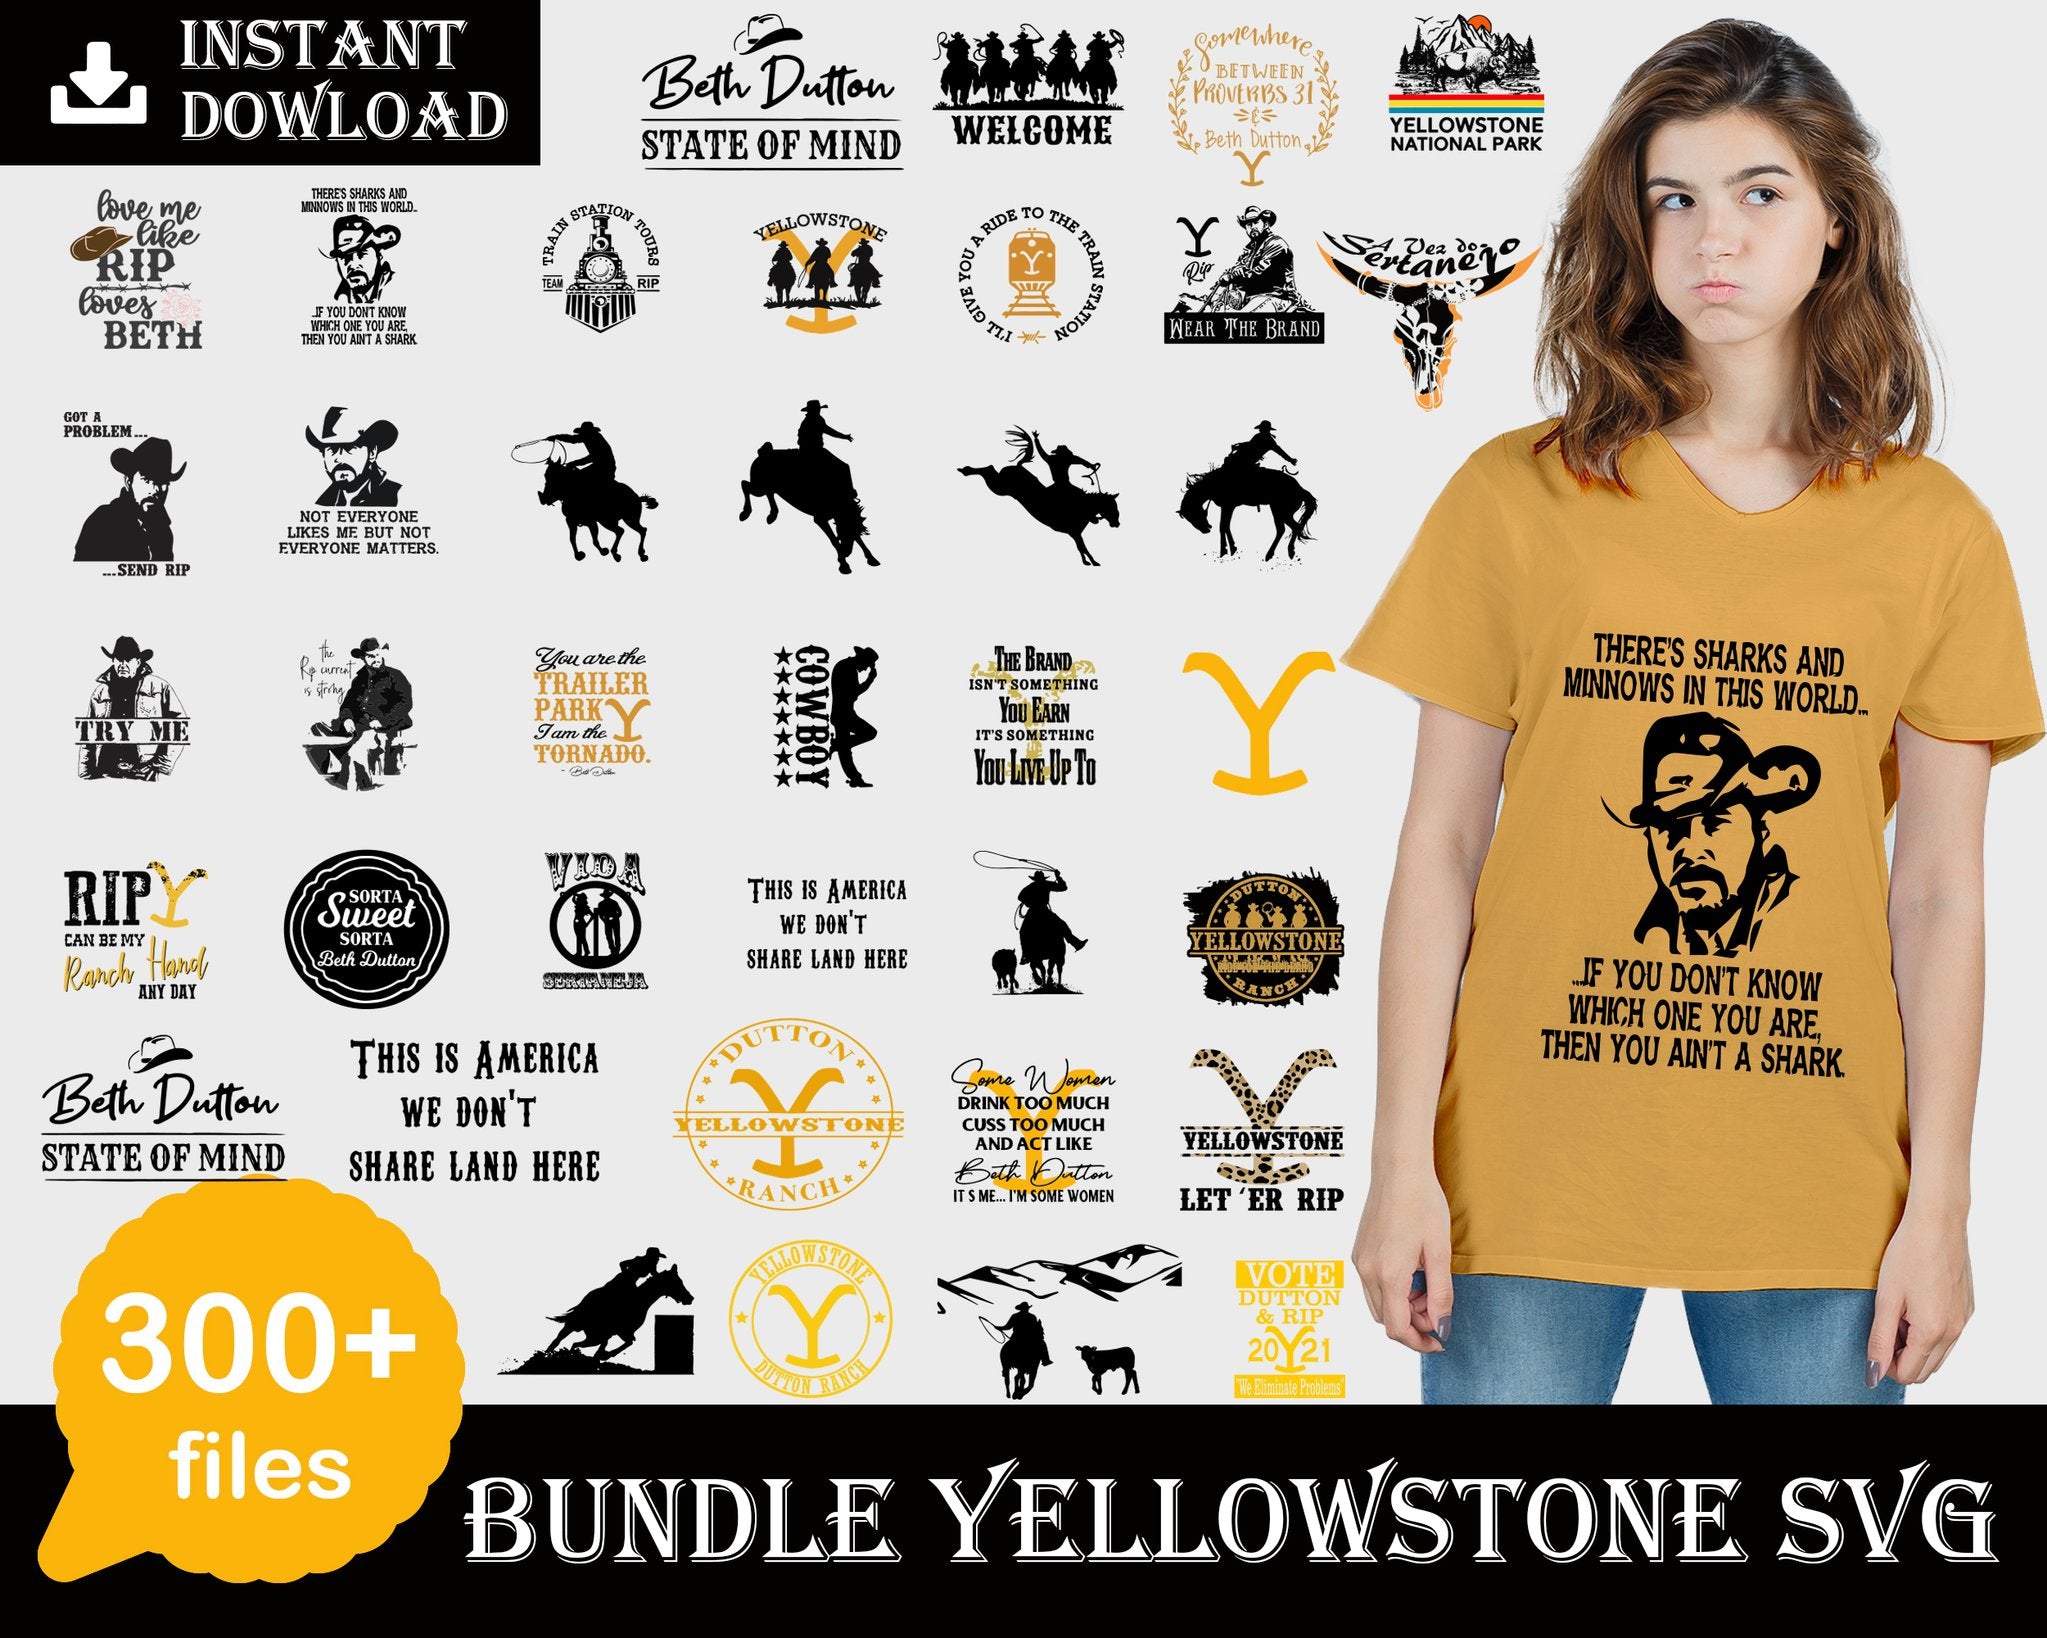 Download Yellowstone Svg Bundle - 1875+ Amazing SVG File - Best Free Download SVG Cutting Files